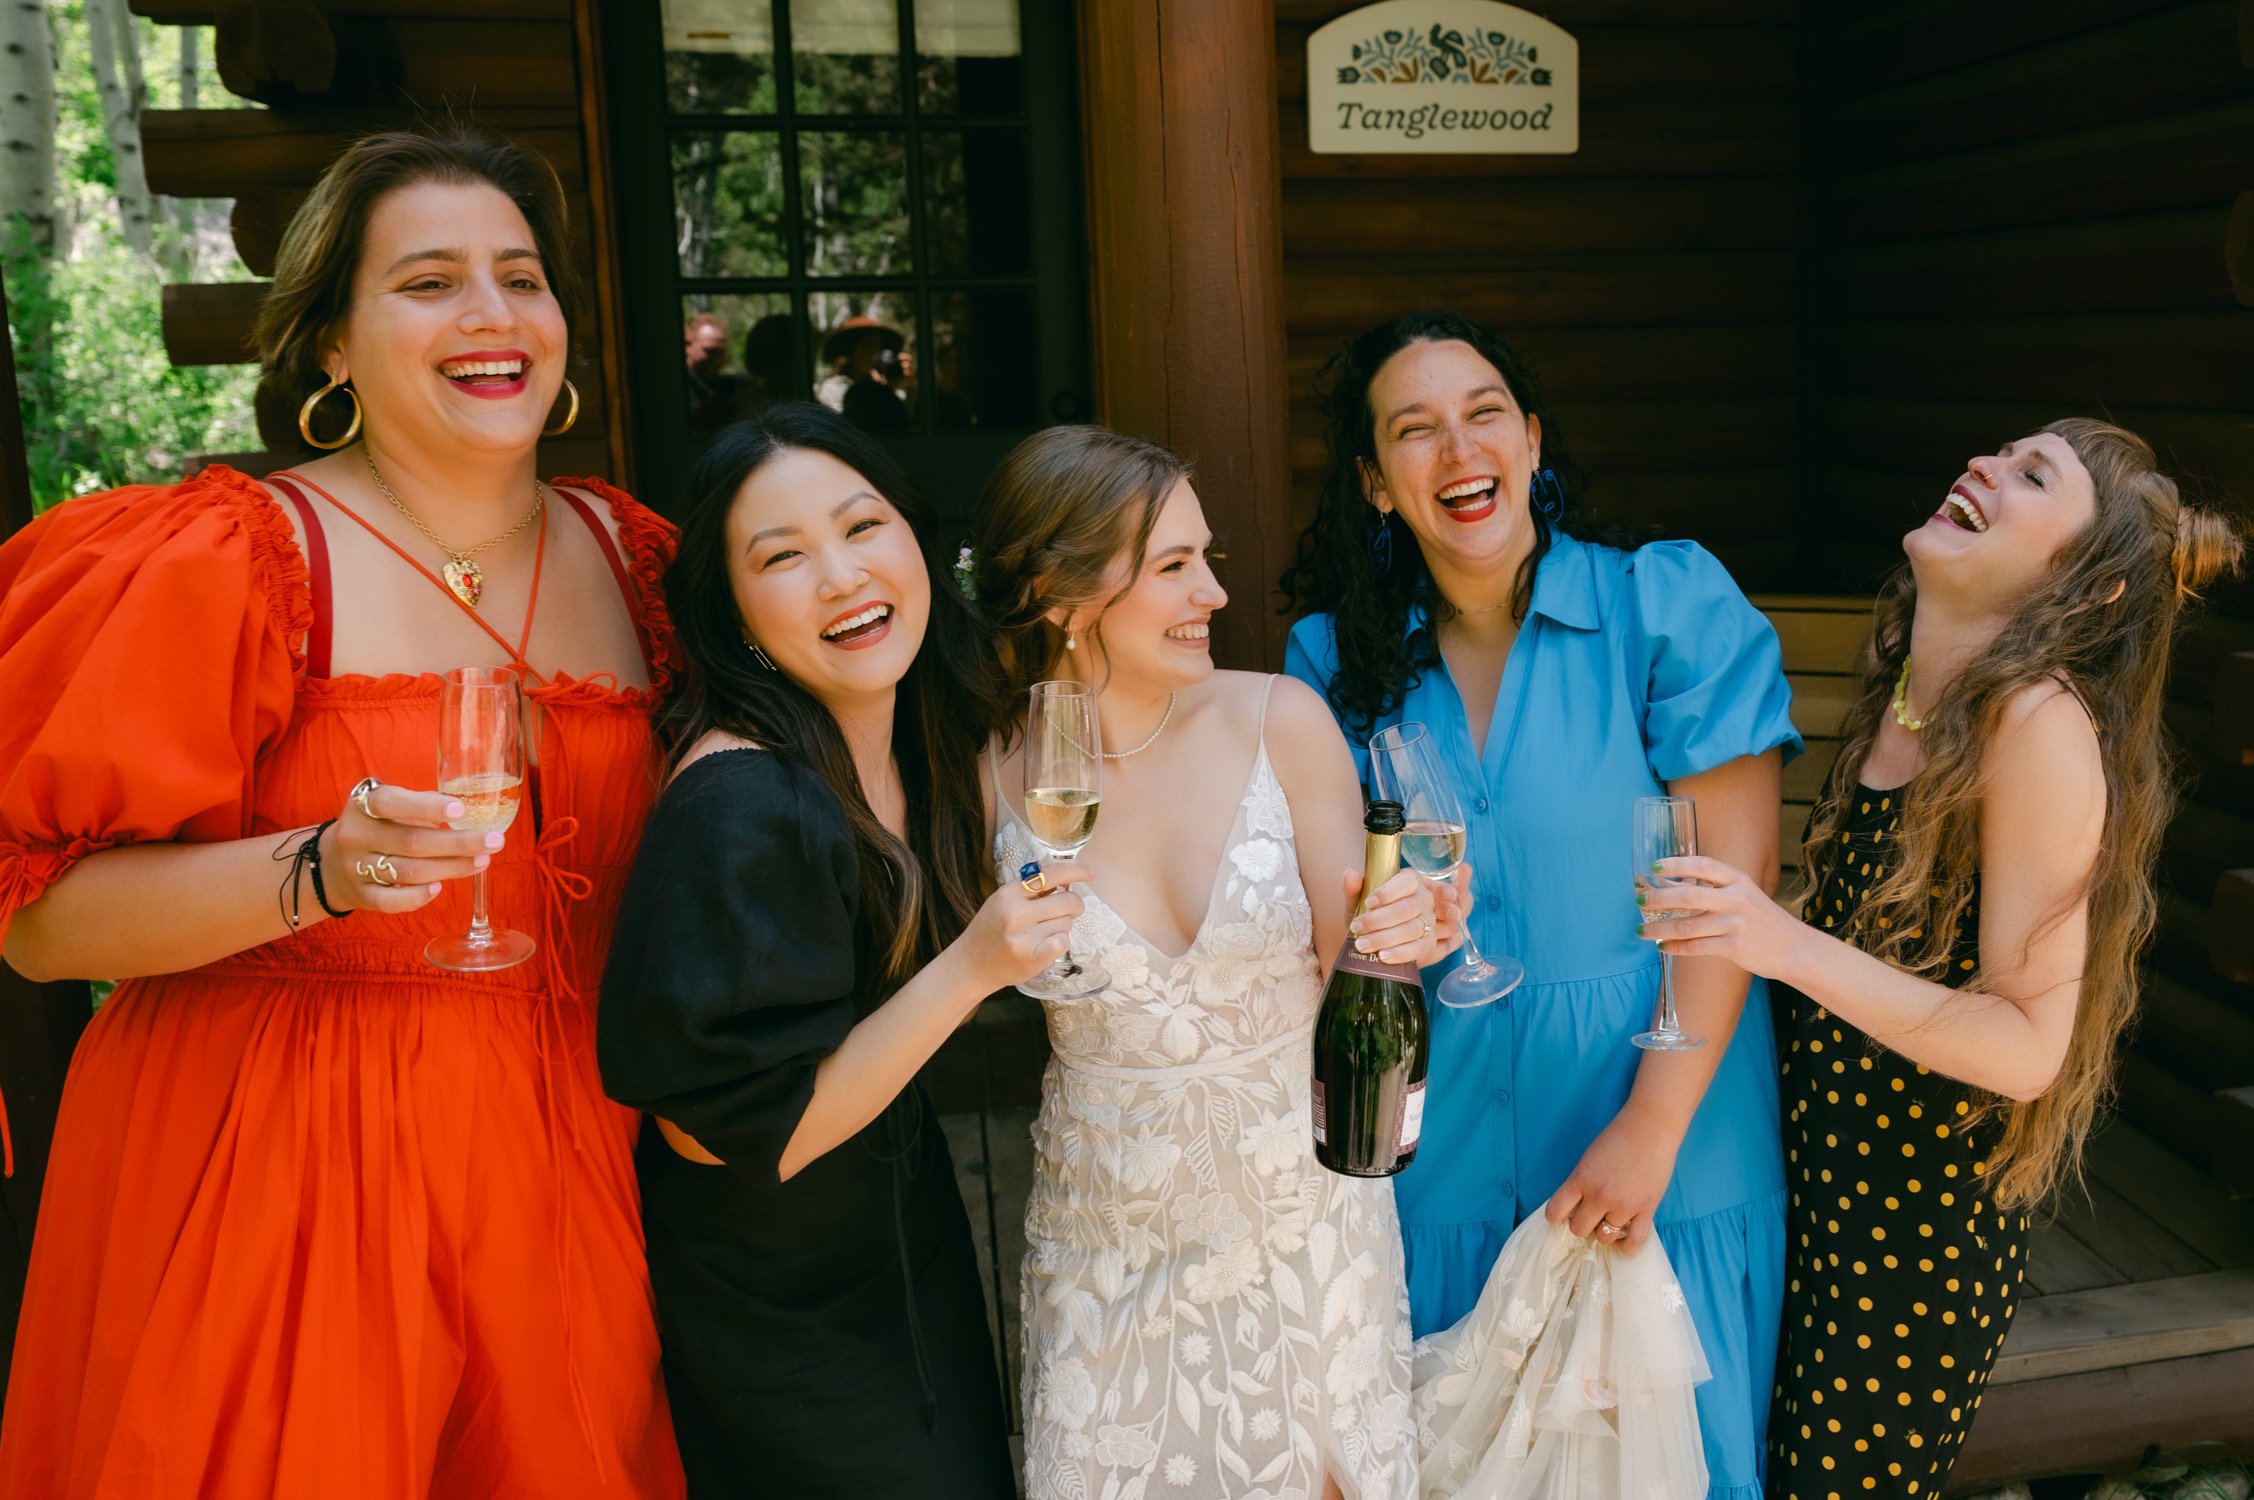 Desolation wilderness hotel wedding, photo of bride and bridesmaids having a champagne toast